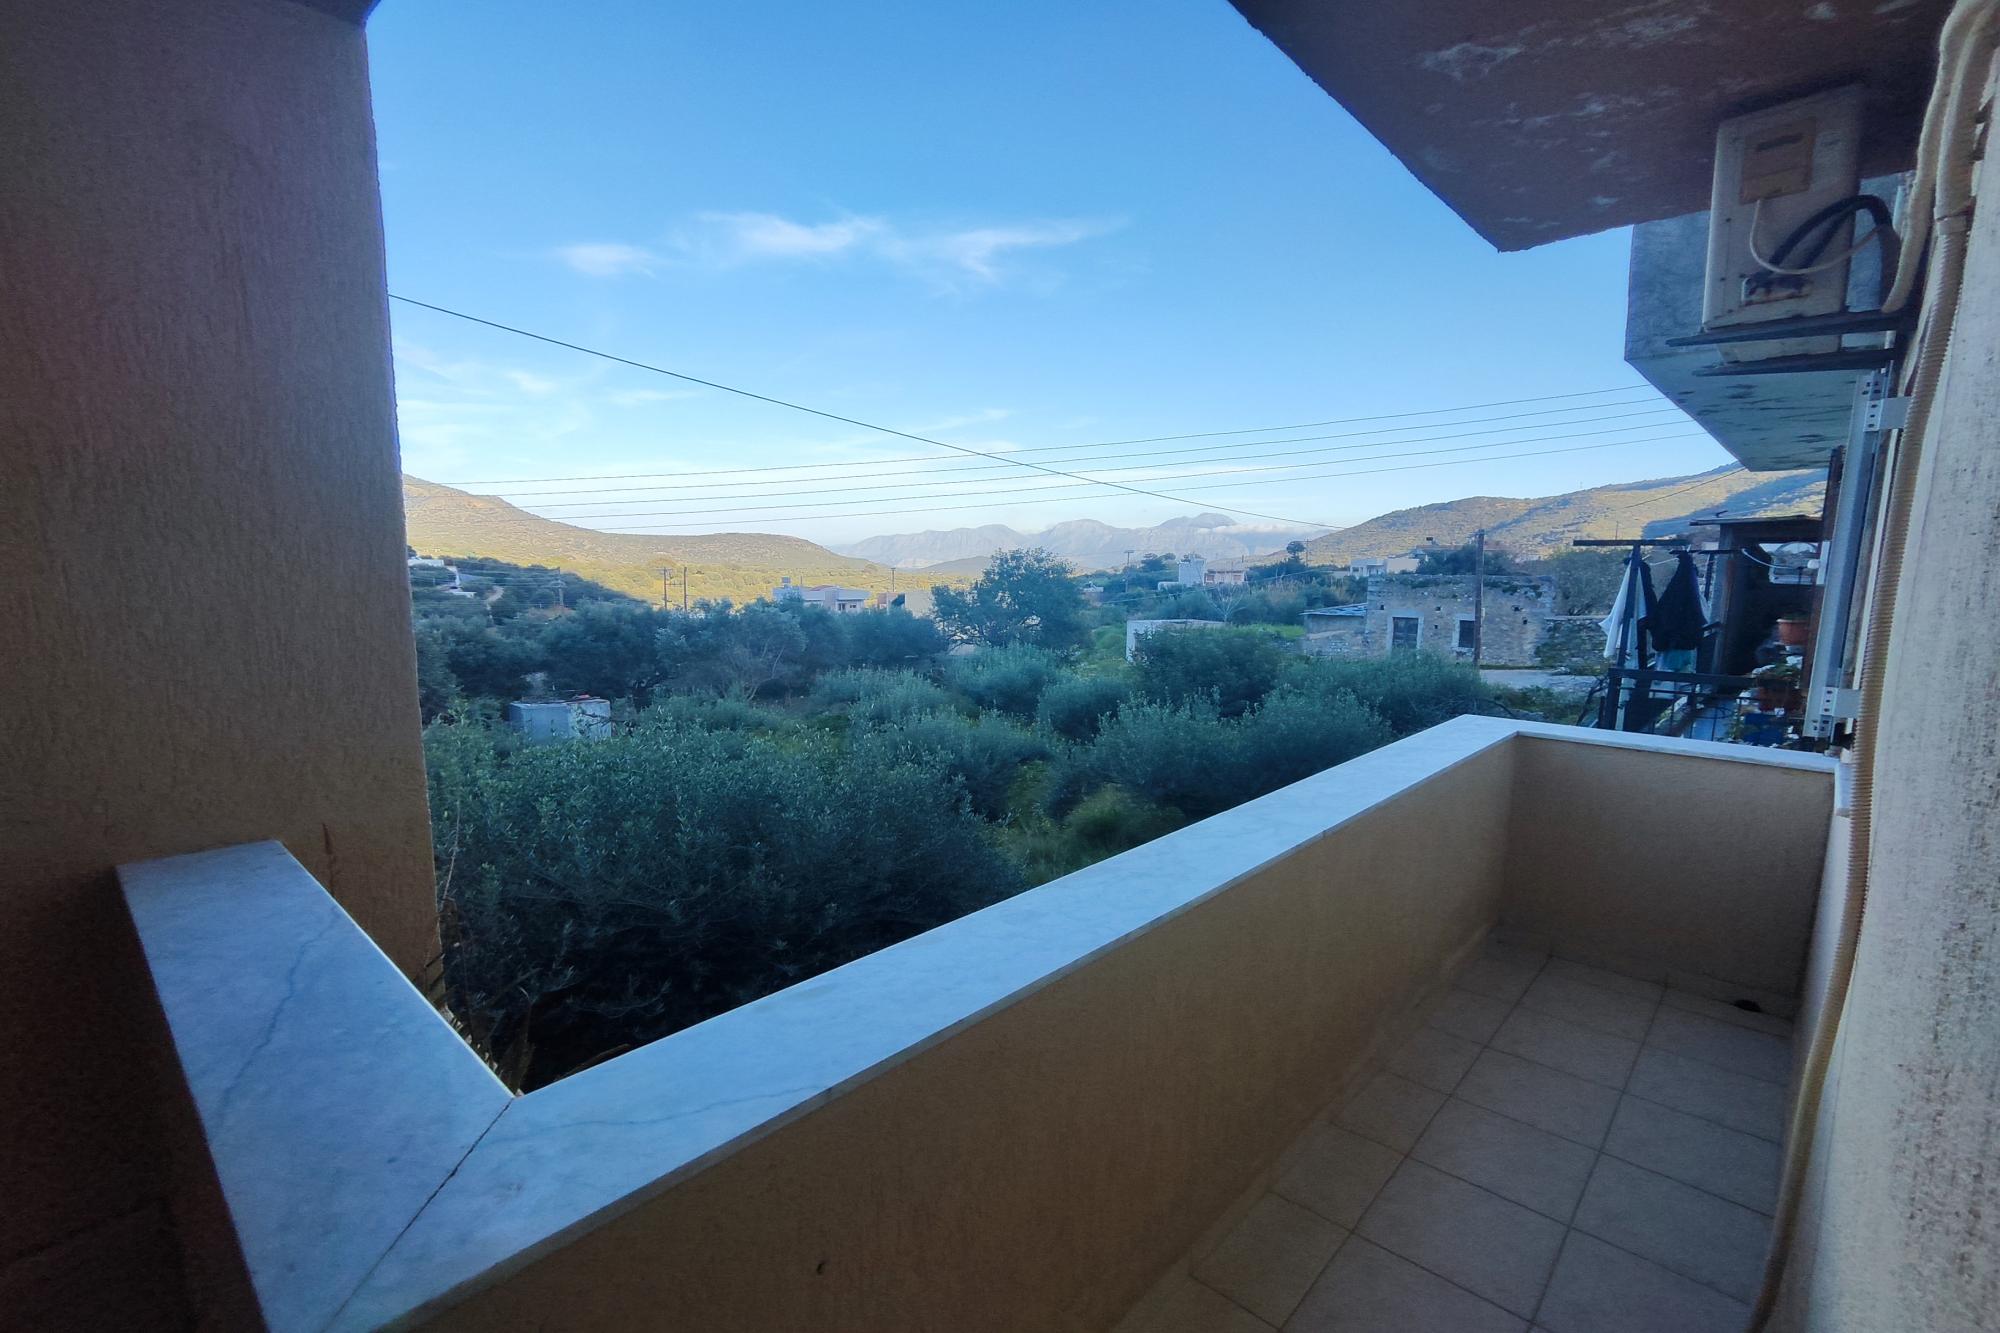 Ground floor apartment in traditional village of Kritsa.